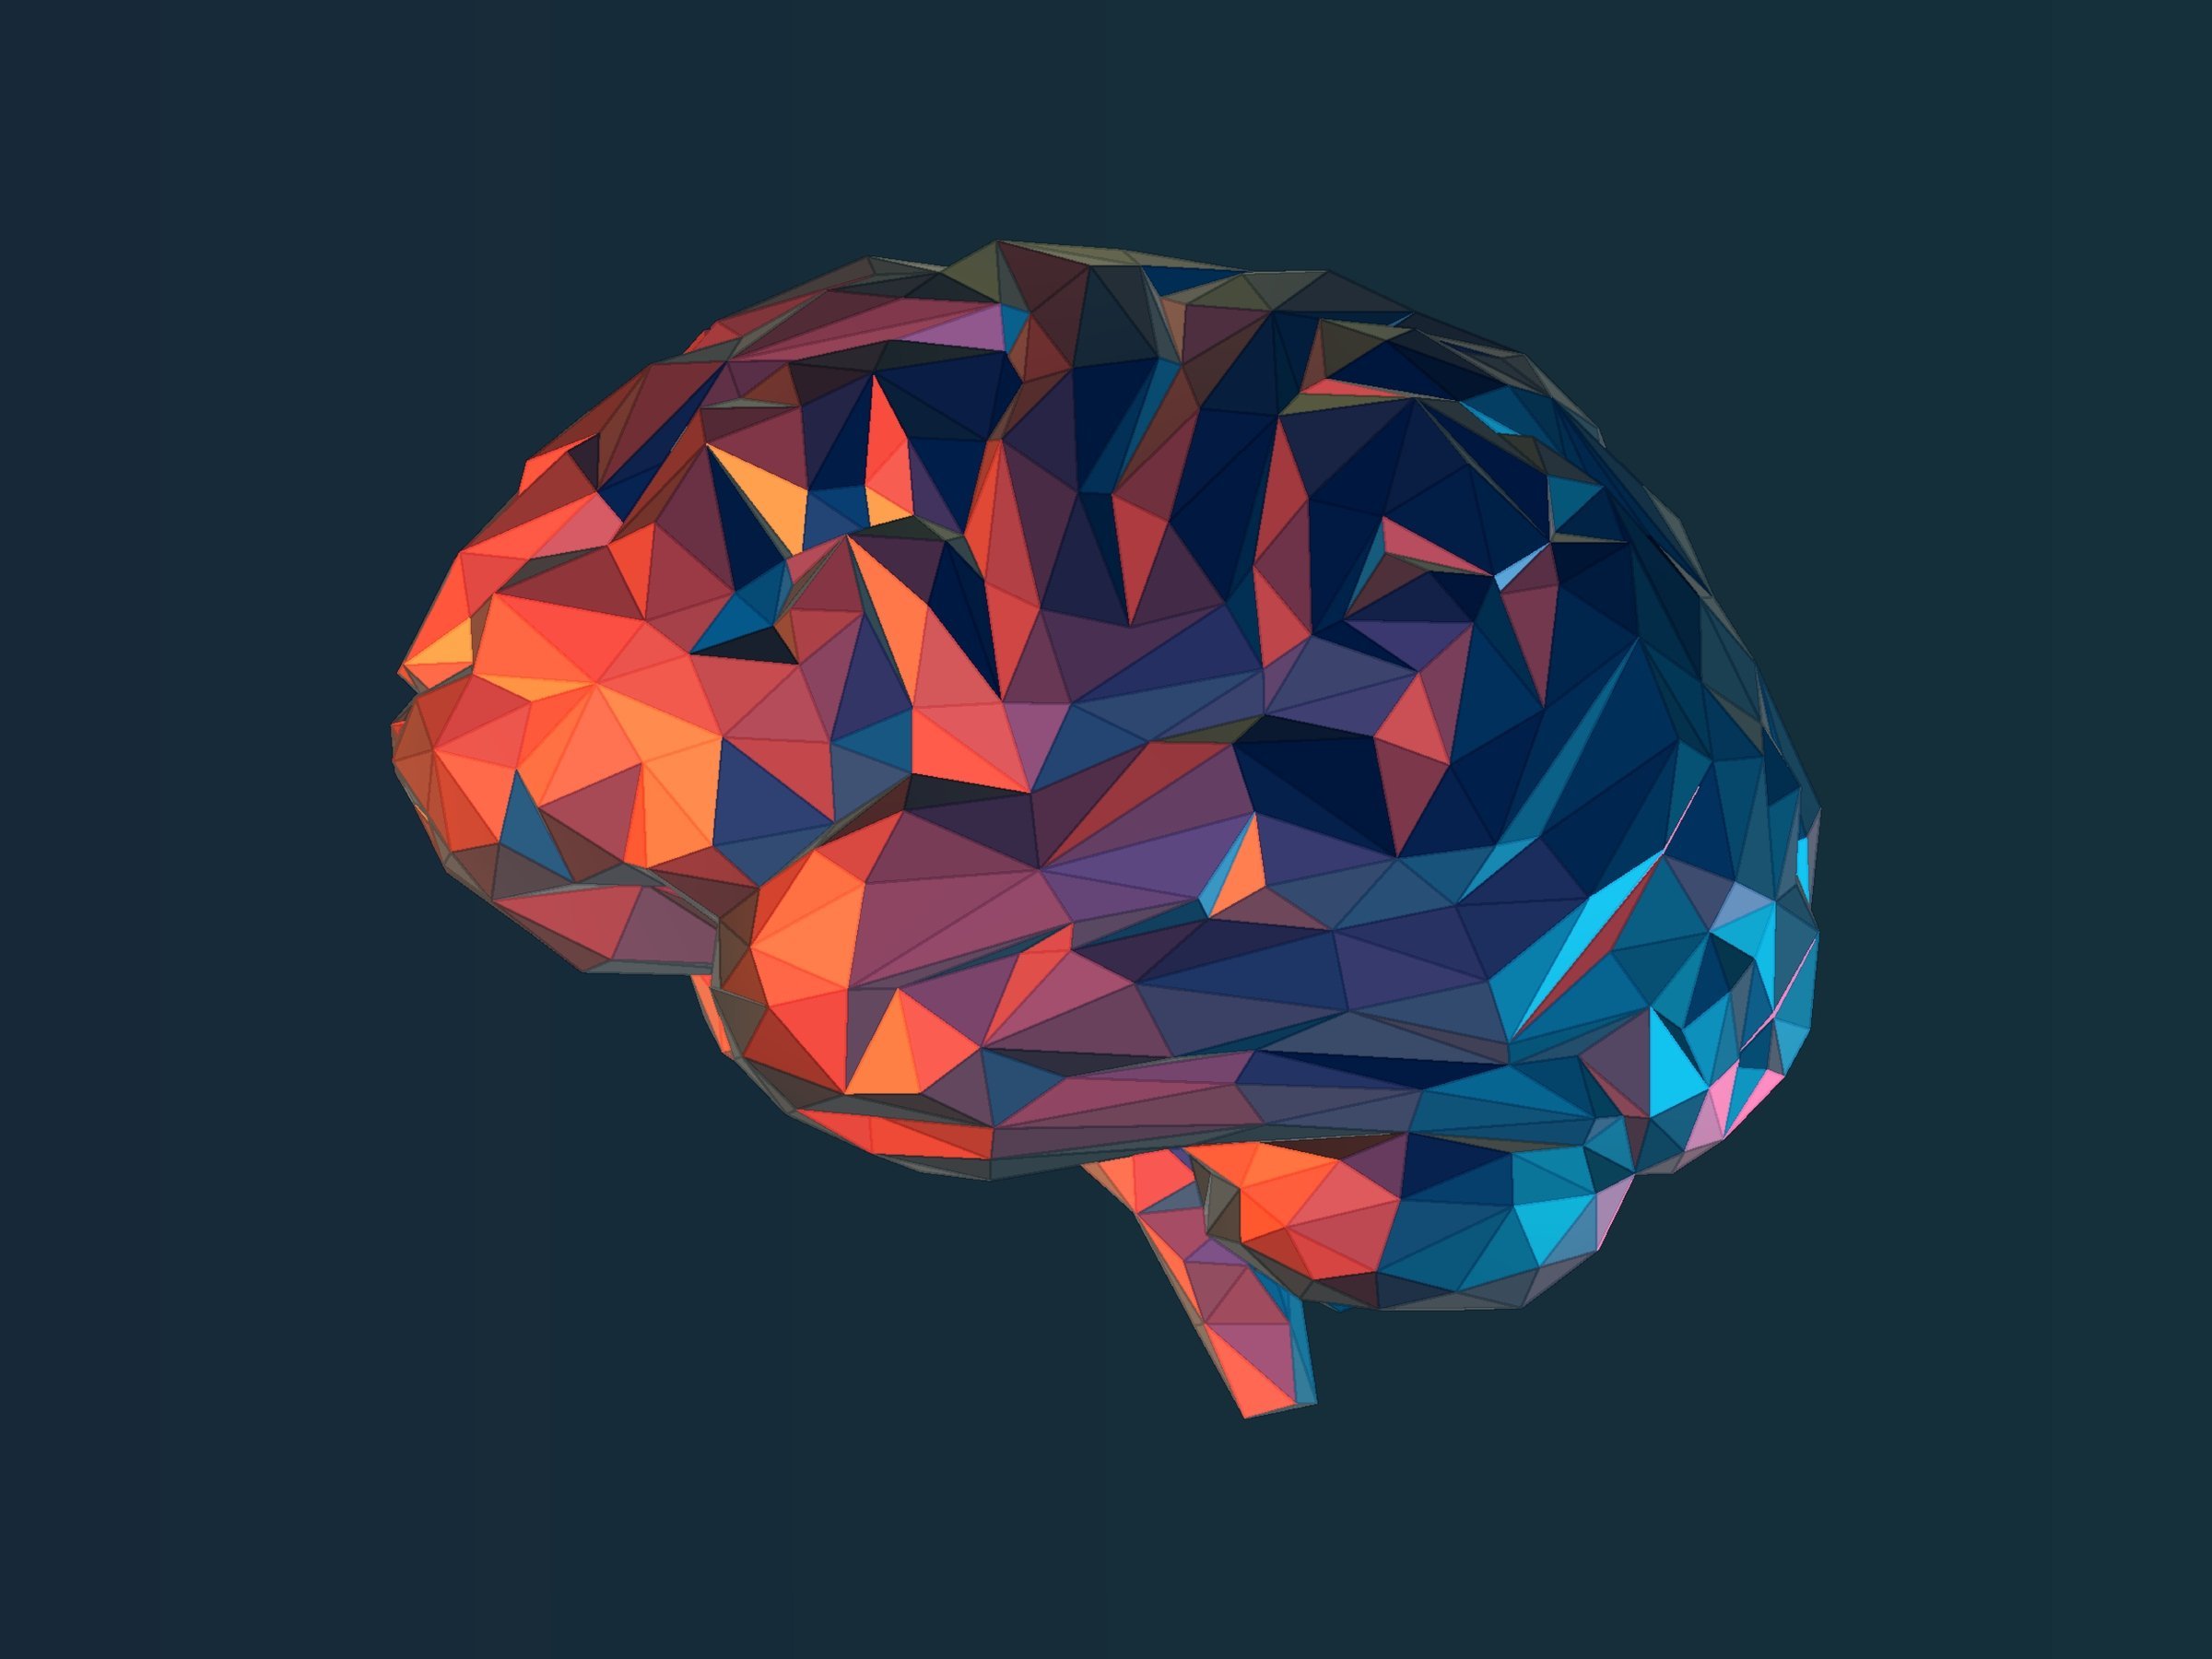  Ongoing Roundtable Discussion Group:   The Cognitive Neuroscience of Religious Cognition   Exploring the Brain Correlates of Religious Beliefs and Practice    Third Virtual Meeting, June 16 at 11 AM CT     Learn More  